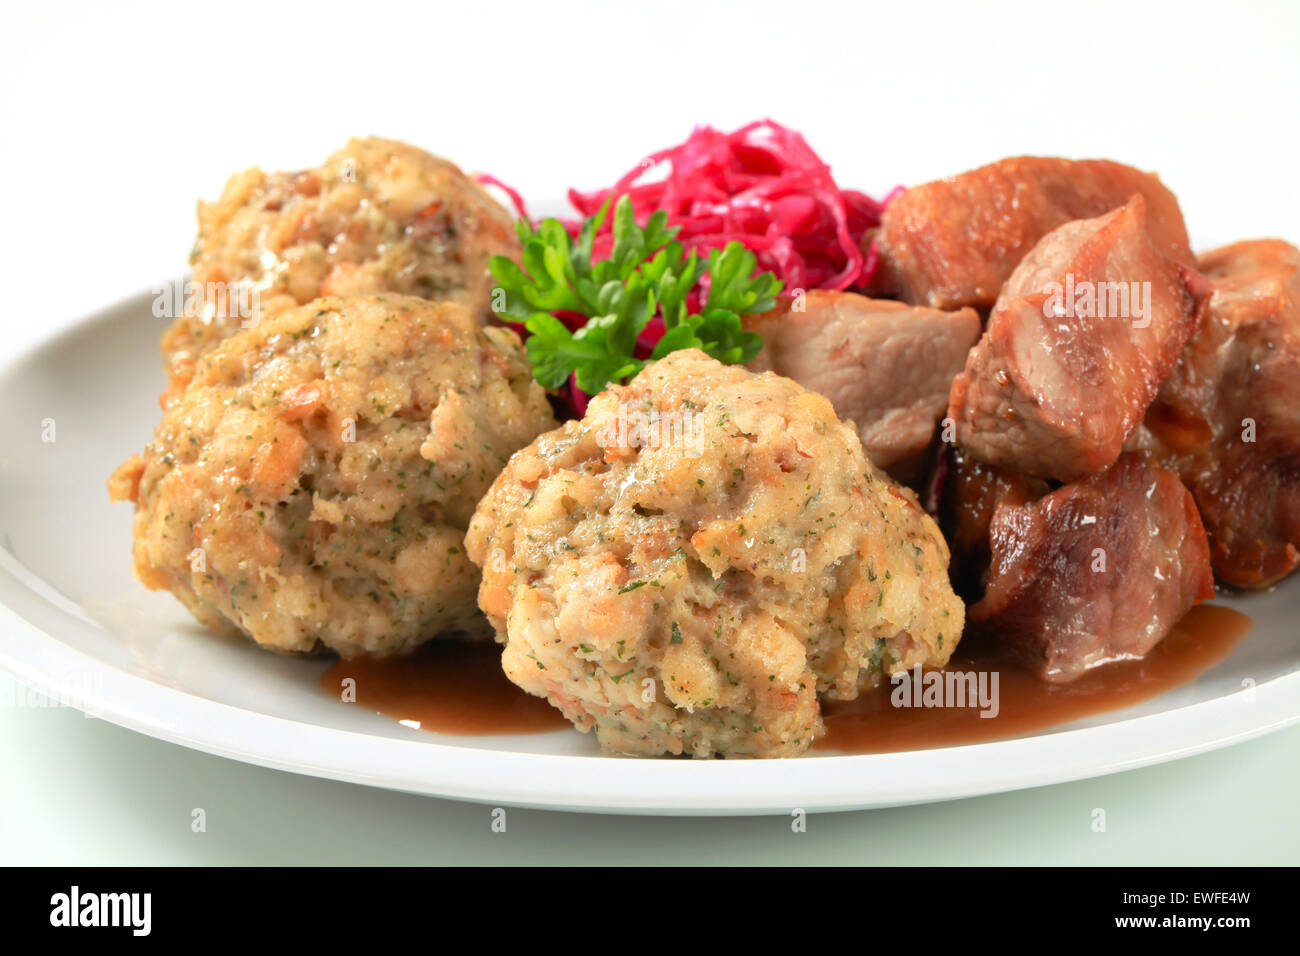 Dish of roast pork with Tyrolean dumplings and red kraut Stock Photo